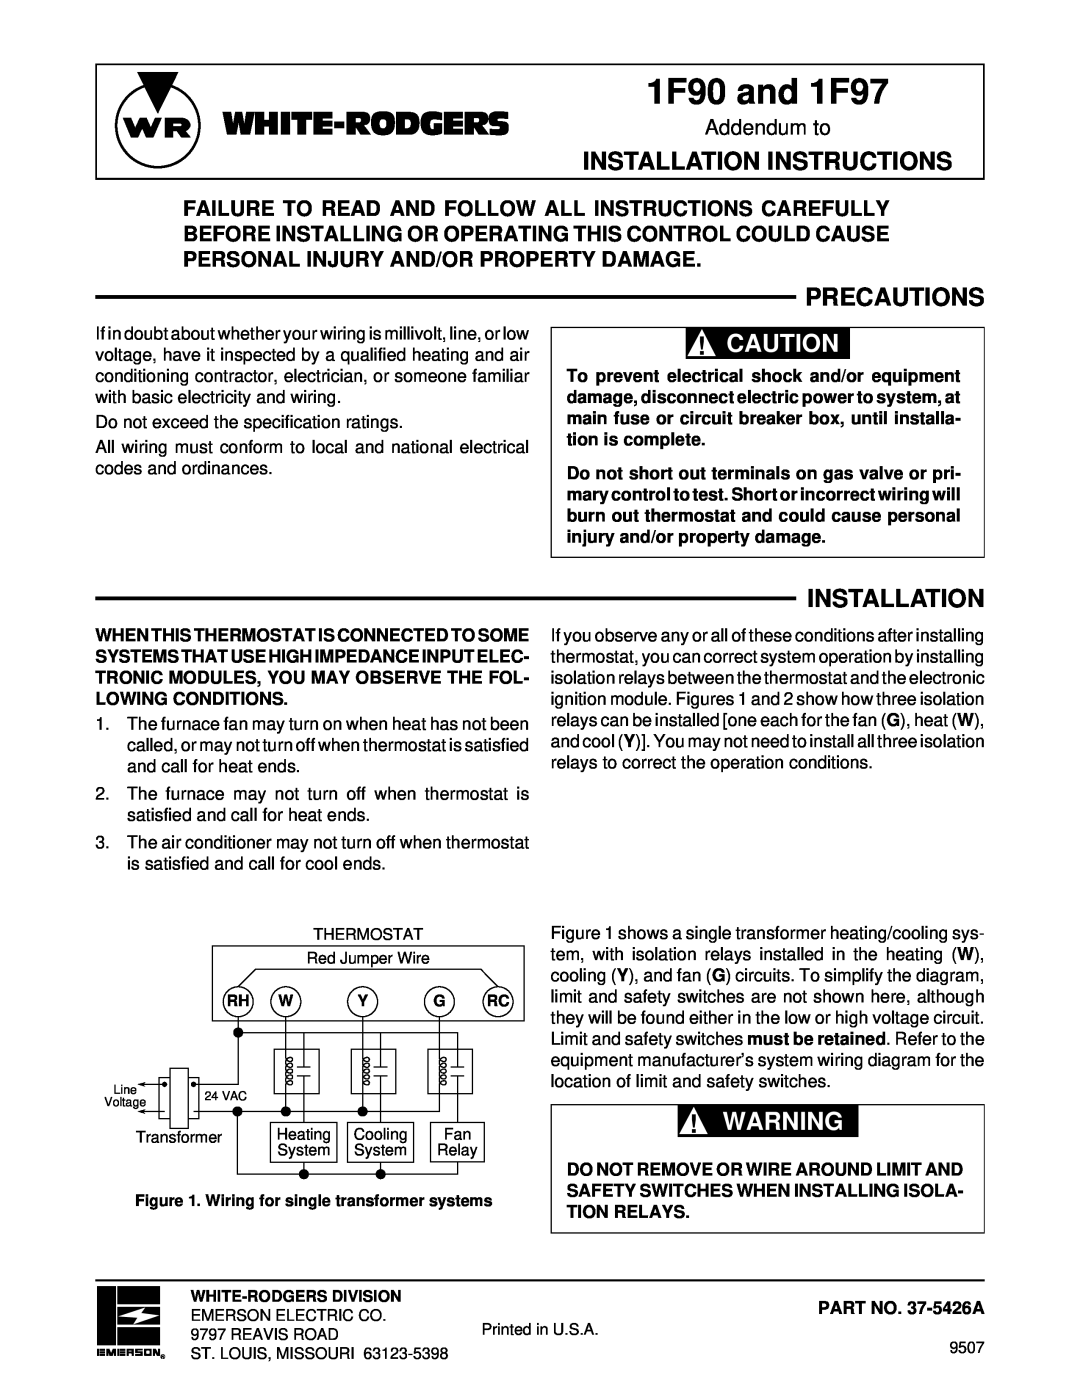 White Rodgers installation instructions Precautions, Installation, 1F90 and 1F97, White-Rodgers, Addendum to 